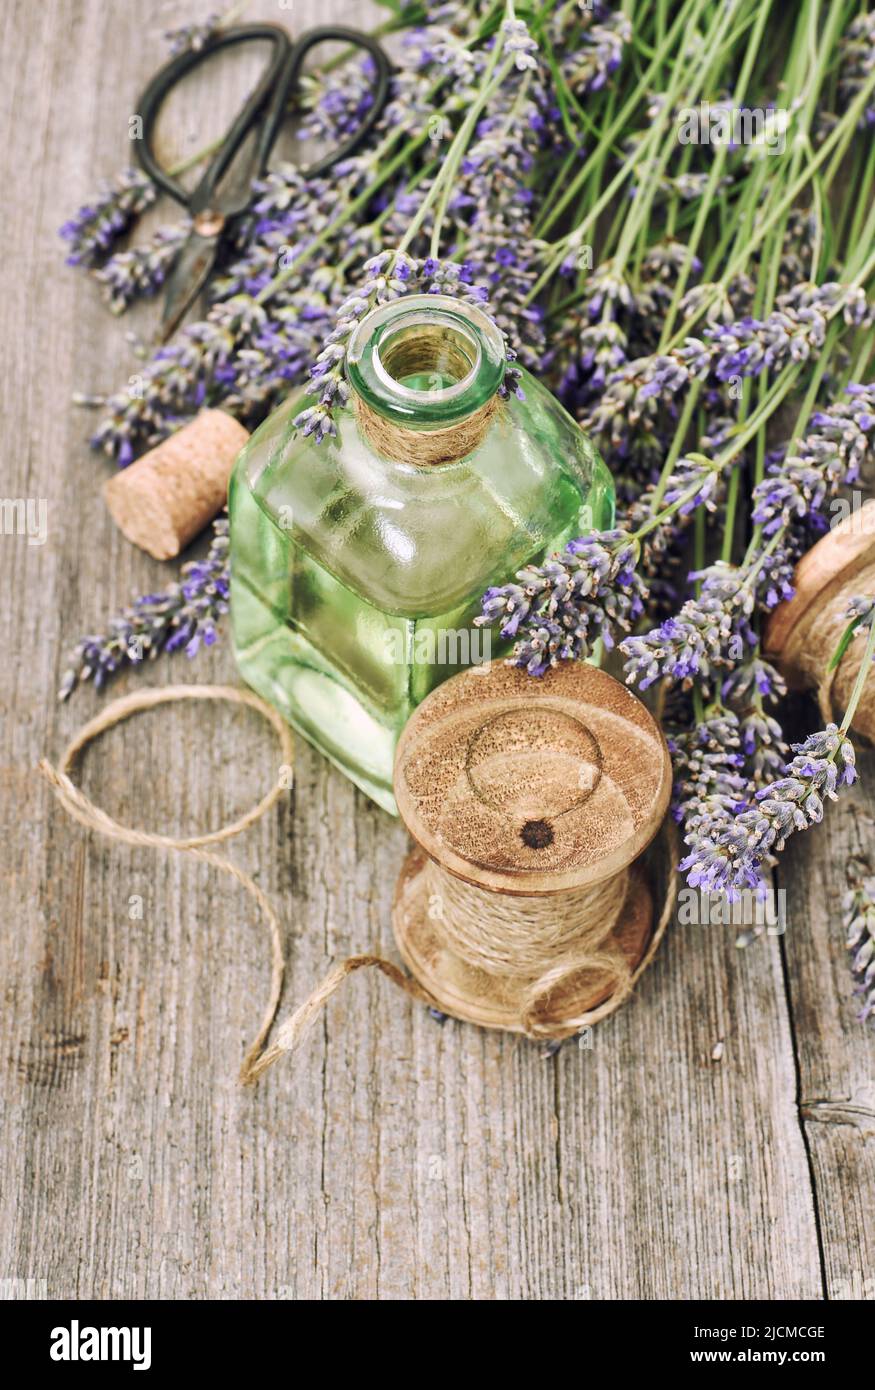 Lavender flowers and herbal oil bottle rustic vintage wooden background Stock Photo